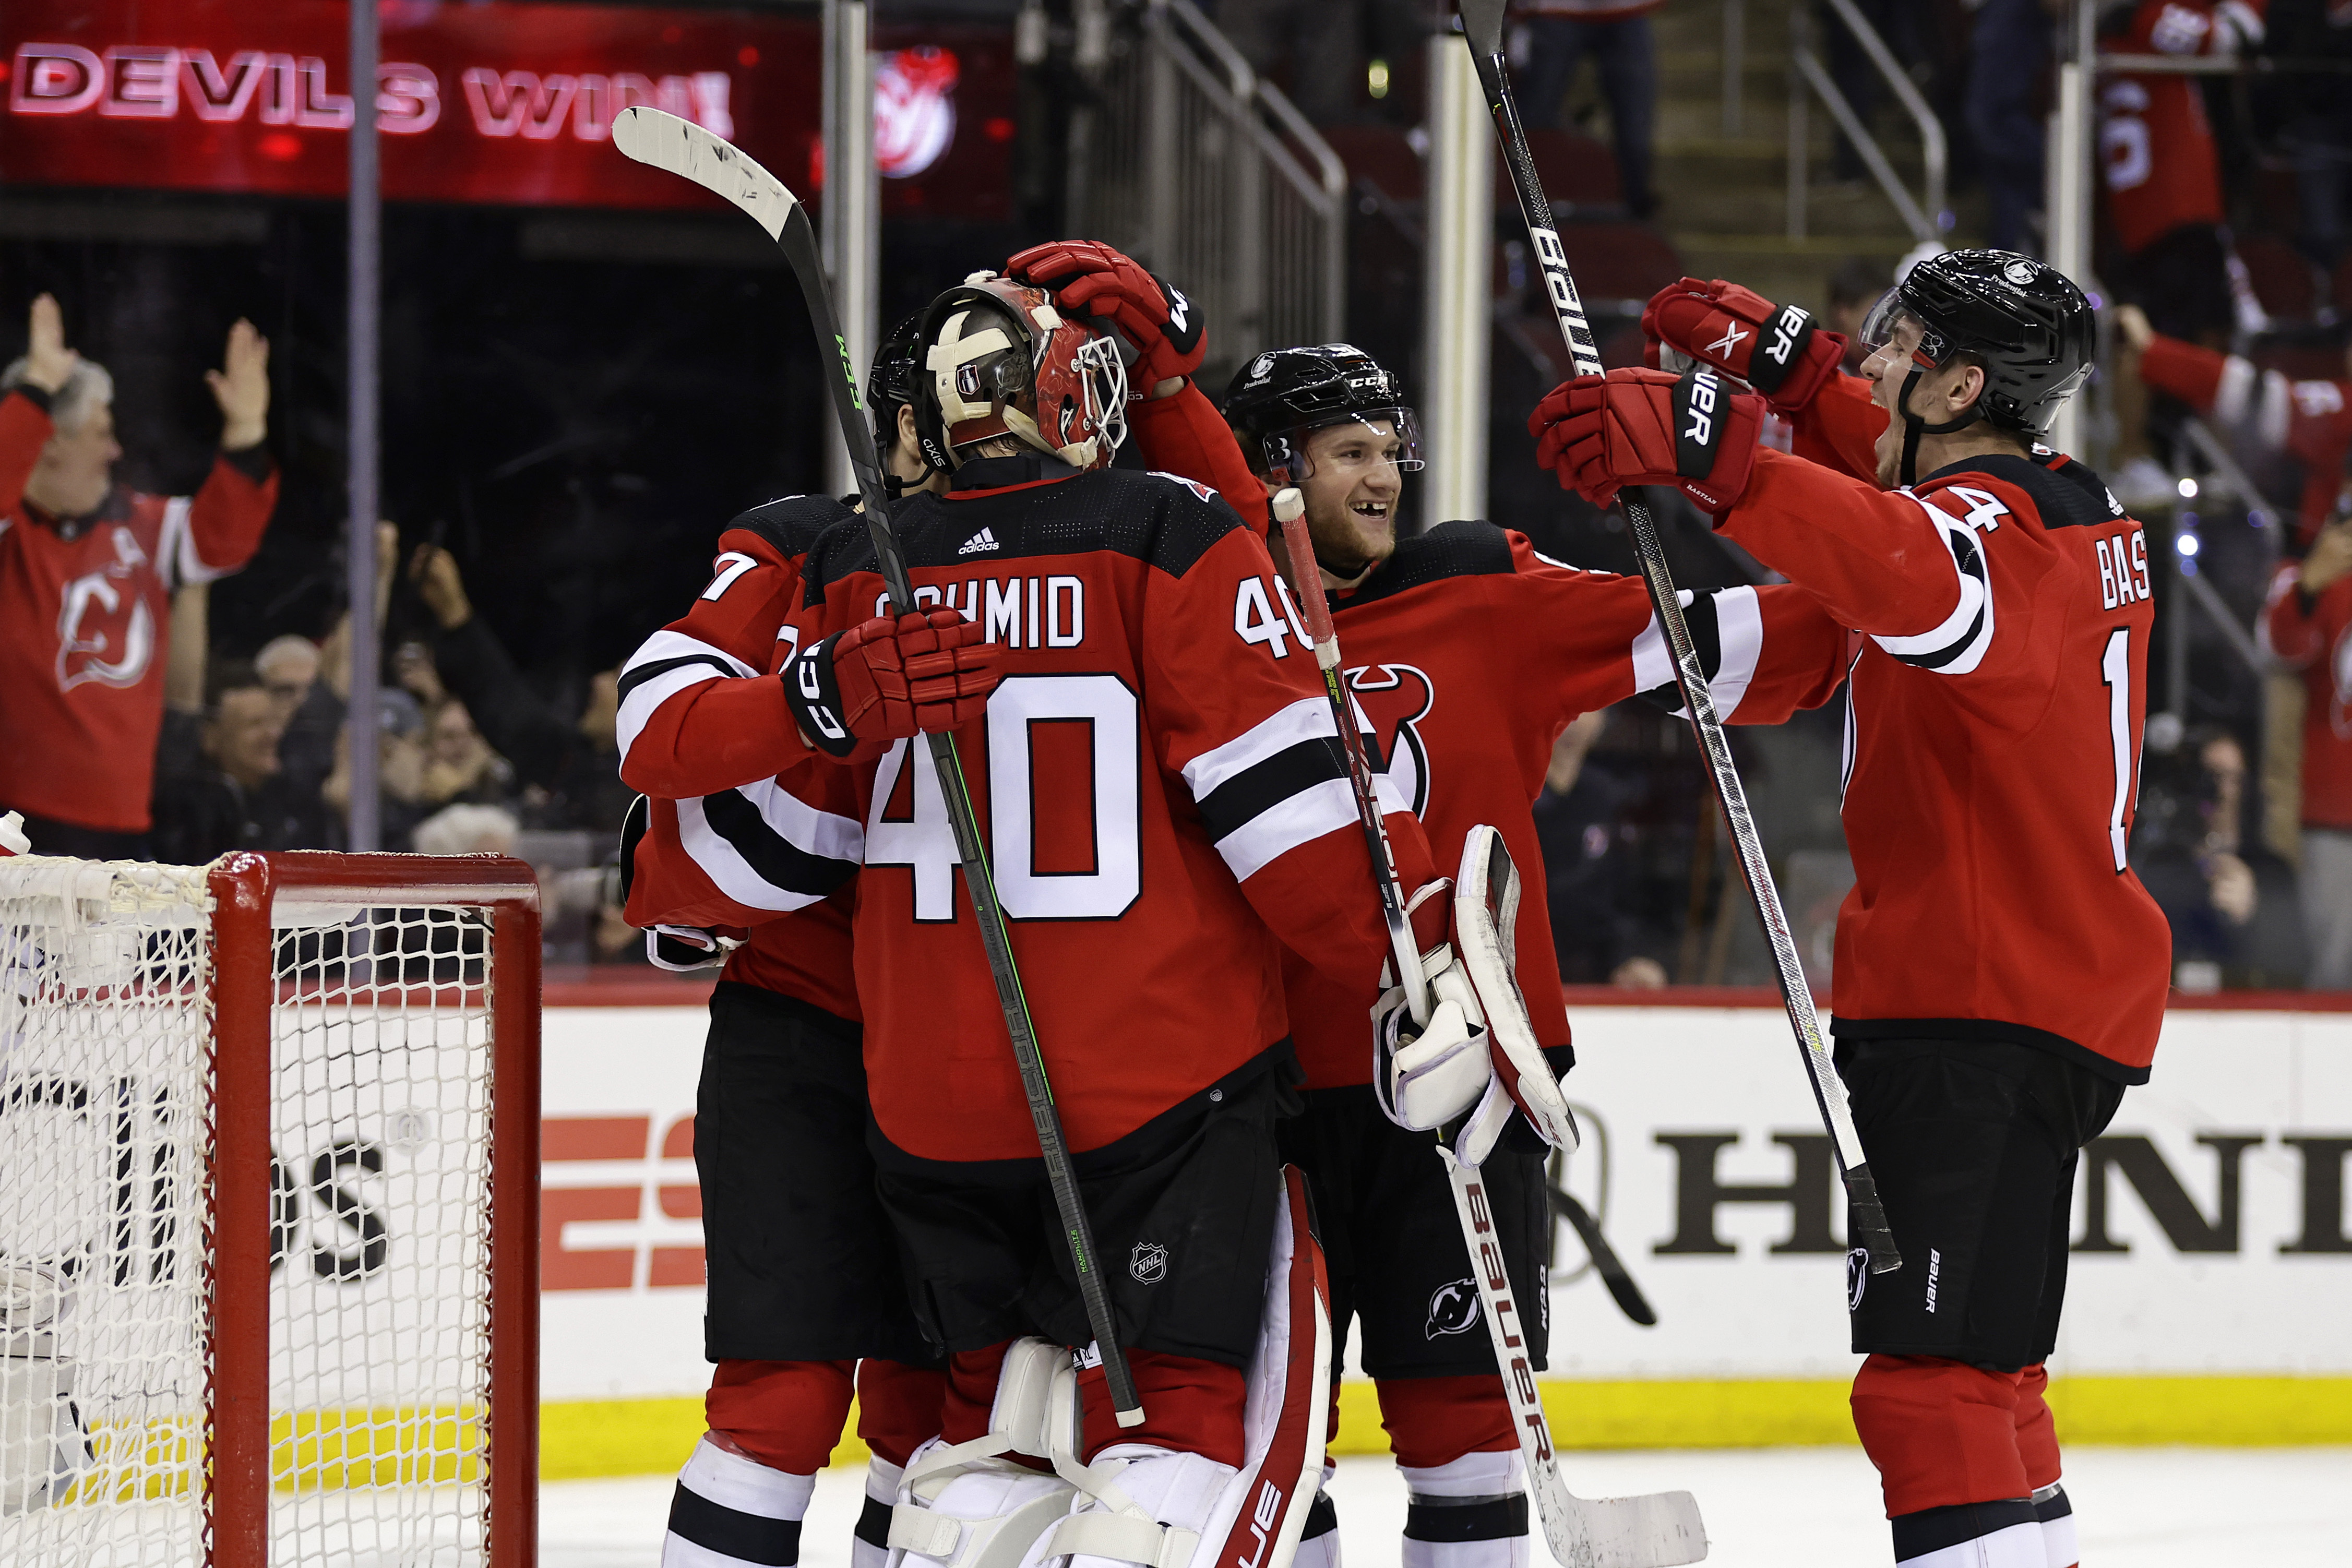 Is the New Jersey Devils' playing style built for the NHL playoffs